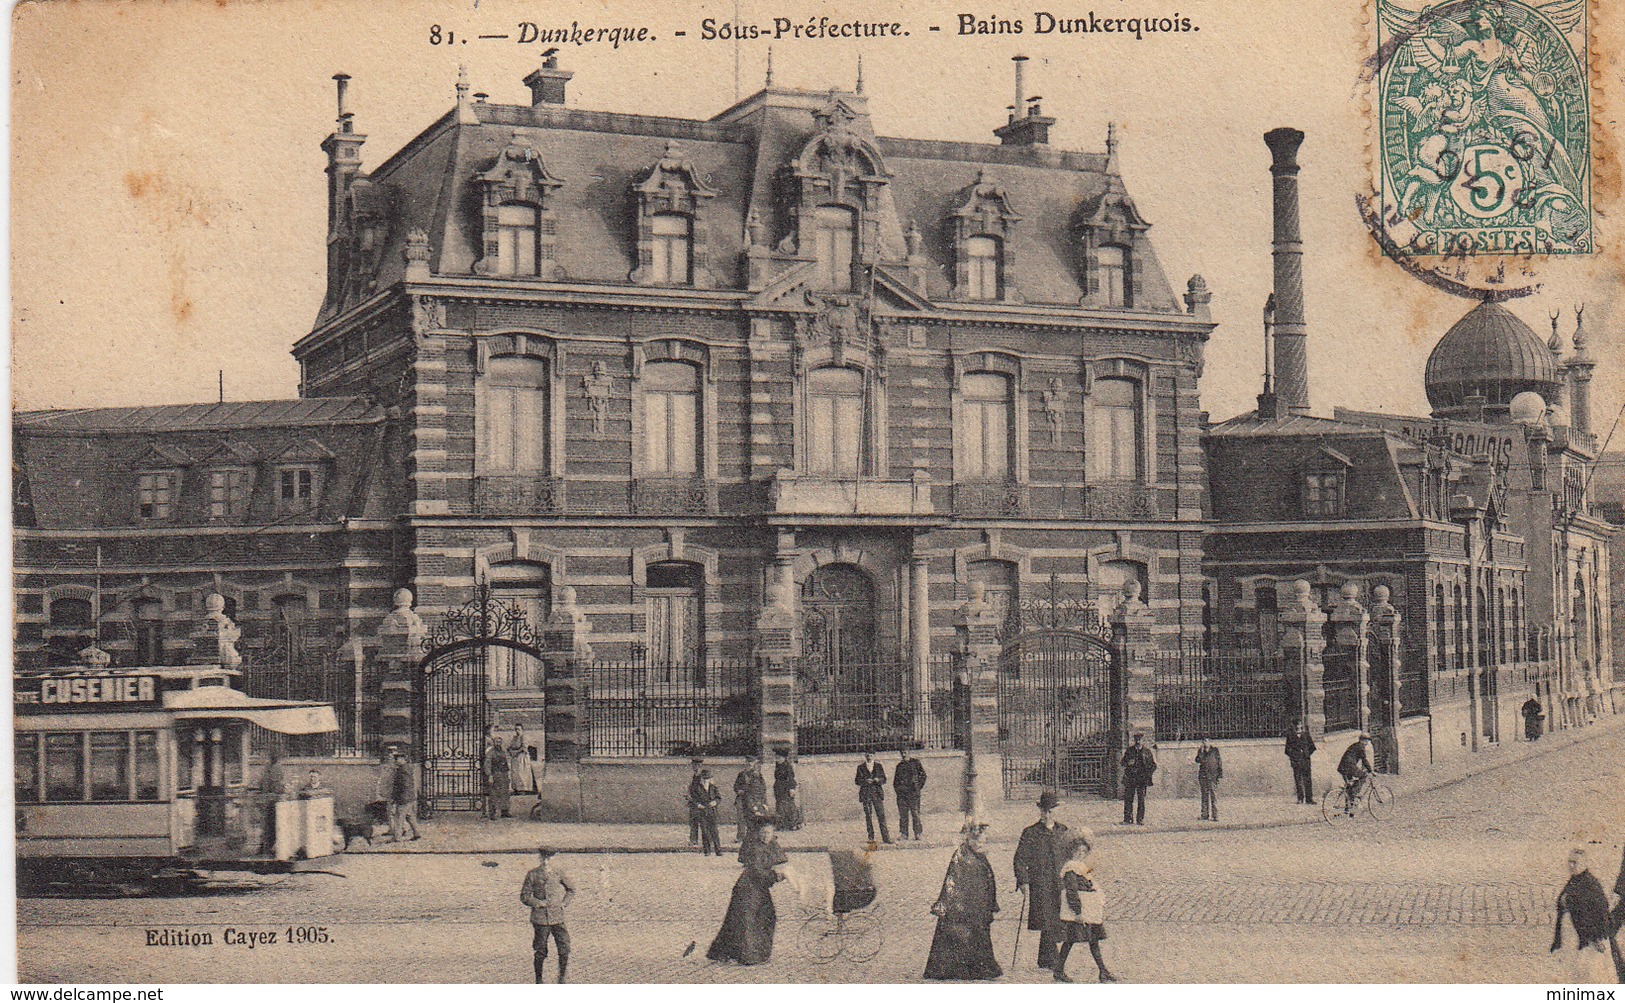 Dunkerque - Sous-Préfecture - Bains Dunkerquois - 1907 - Tram - Dunkerque